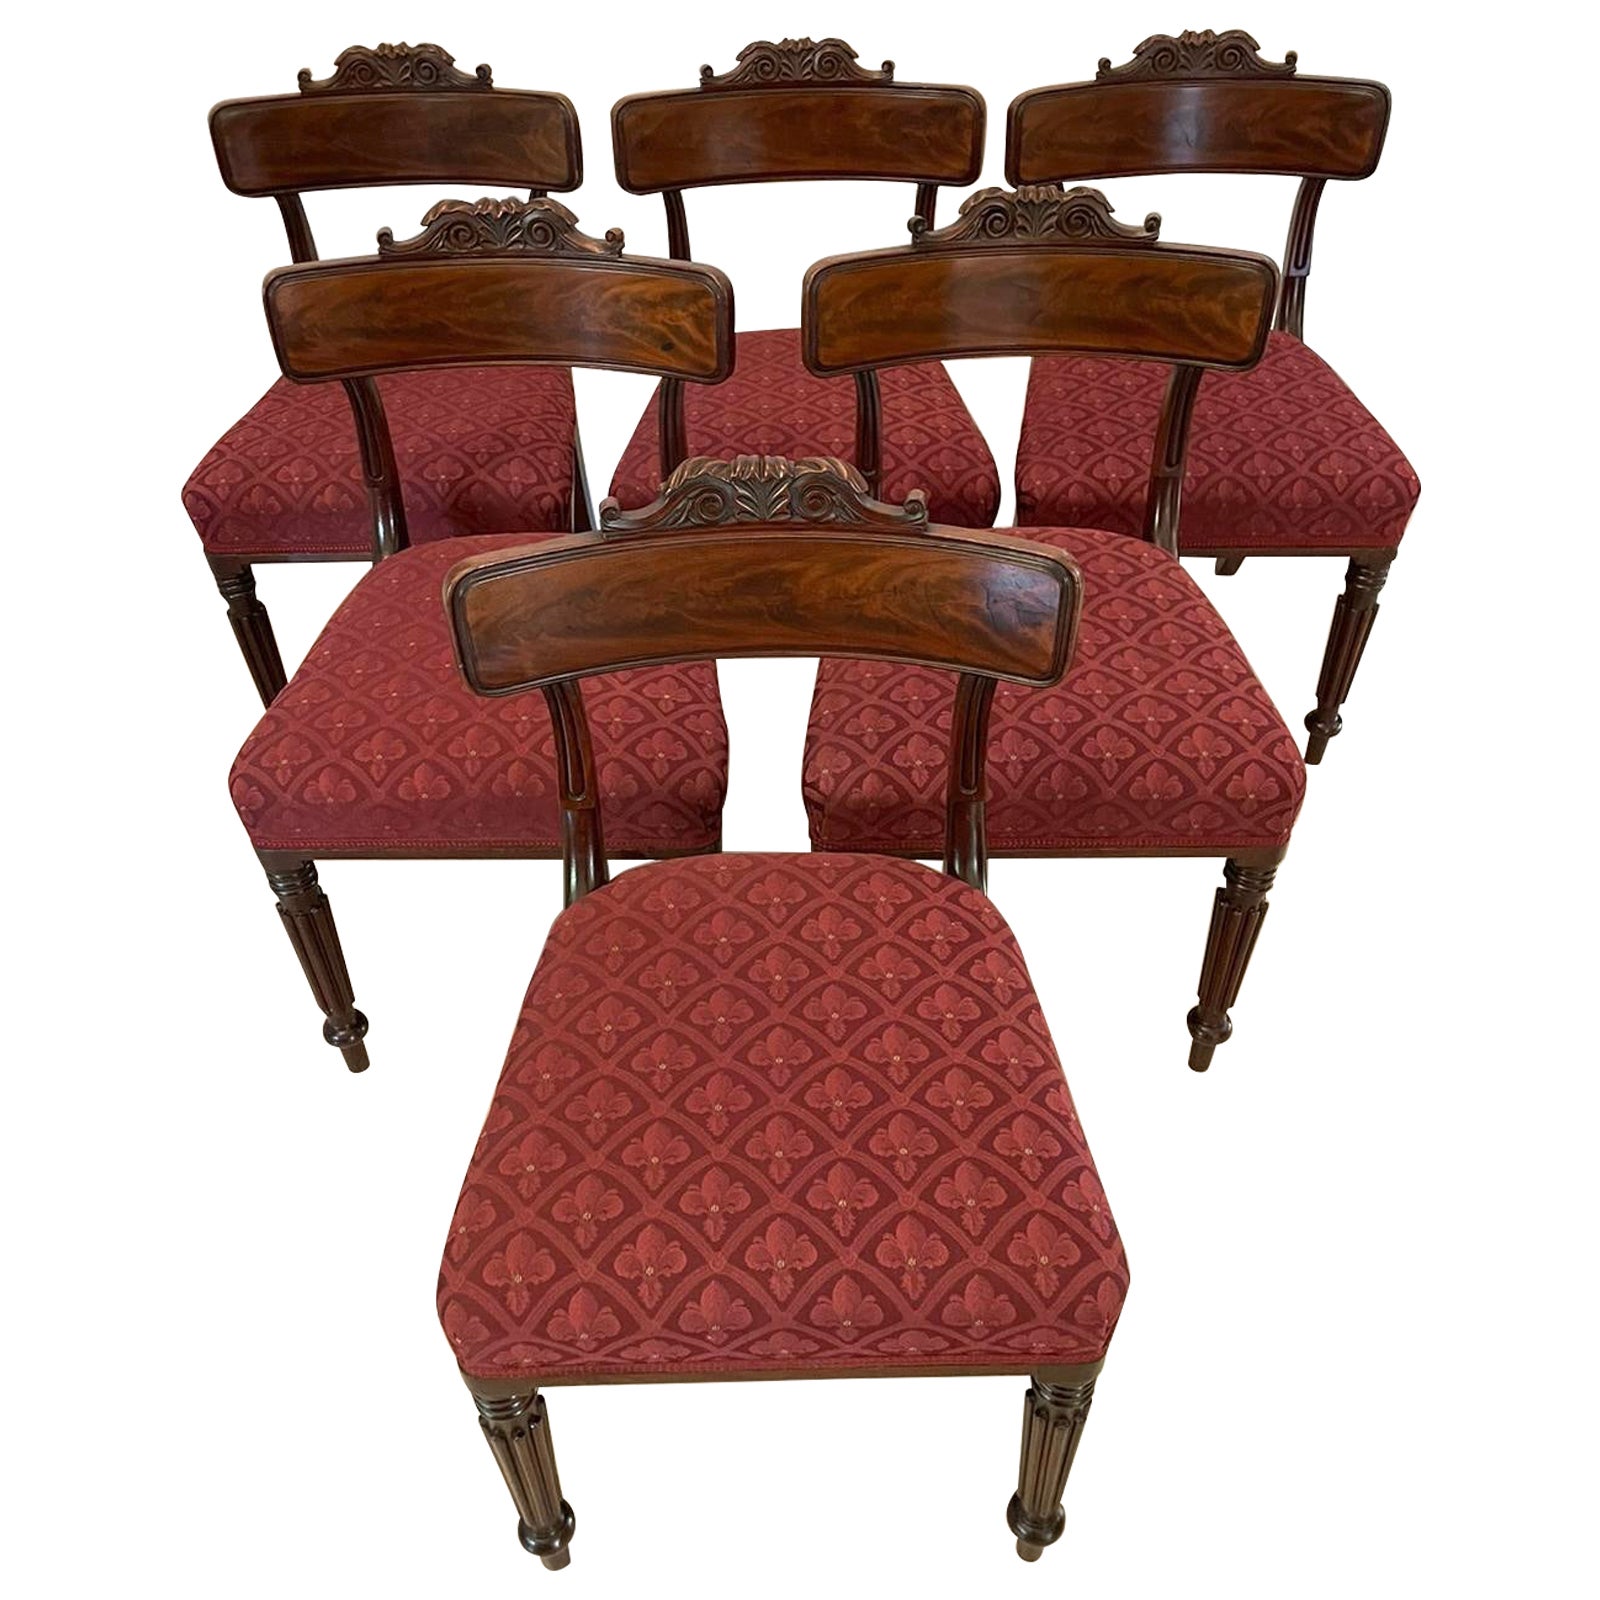 Fine Set of 6 Antique Regency Quality Mahogany Library Chairs by Gillows 